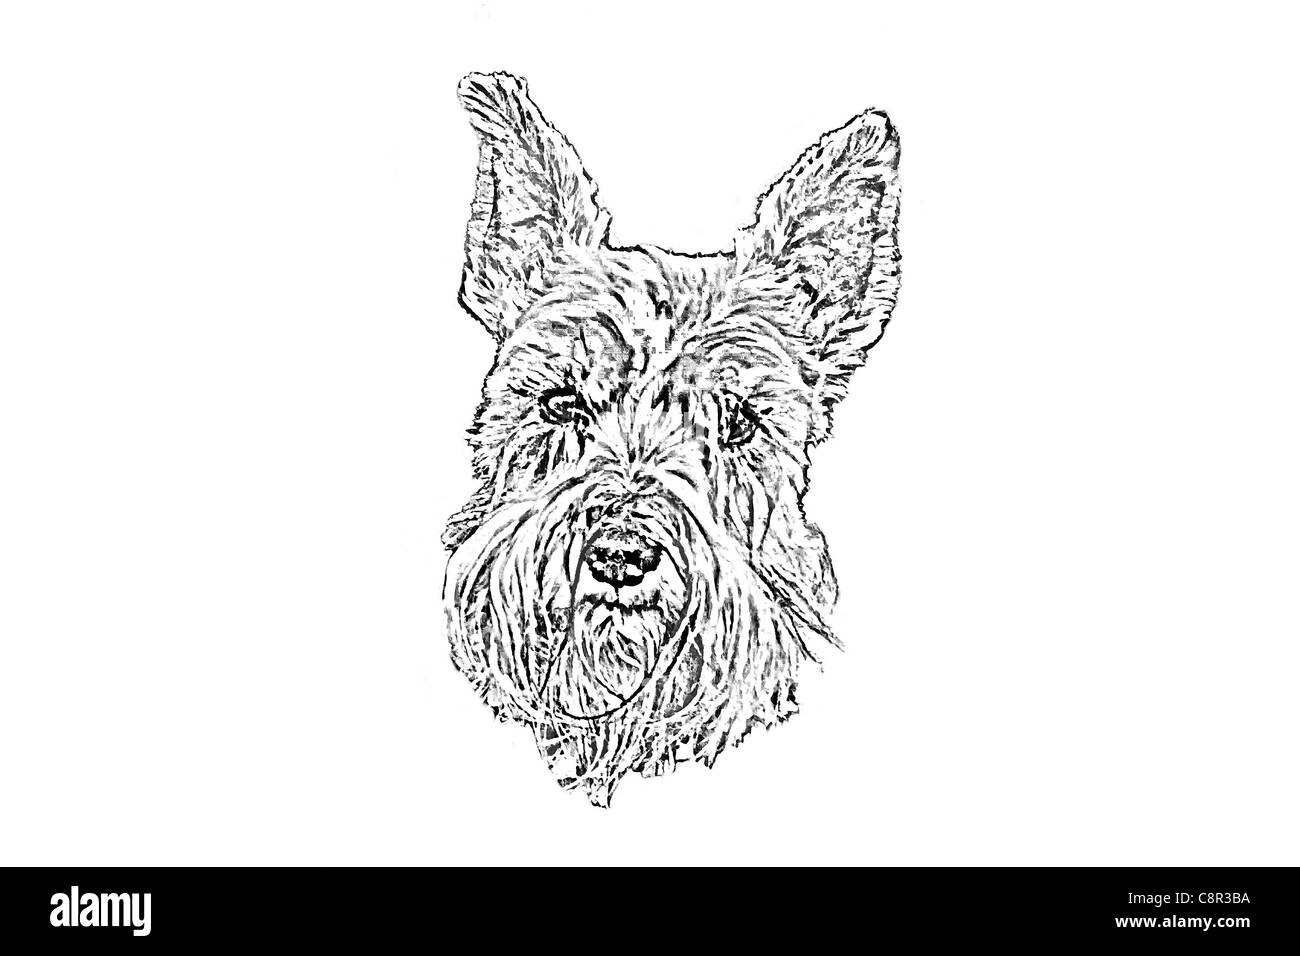 Sketch Style Portrait of a Scottish Terrier or Scottie Dog Stock Photo